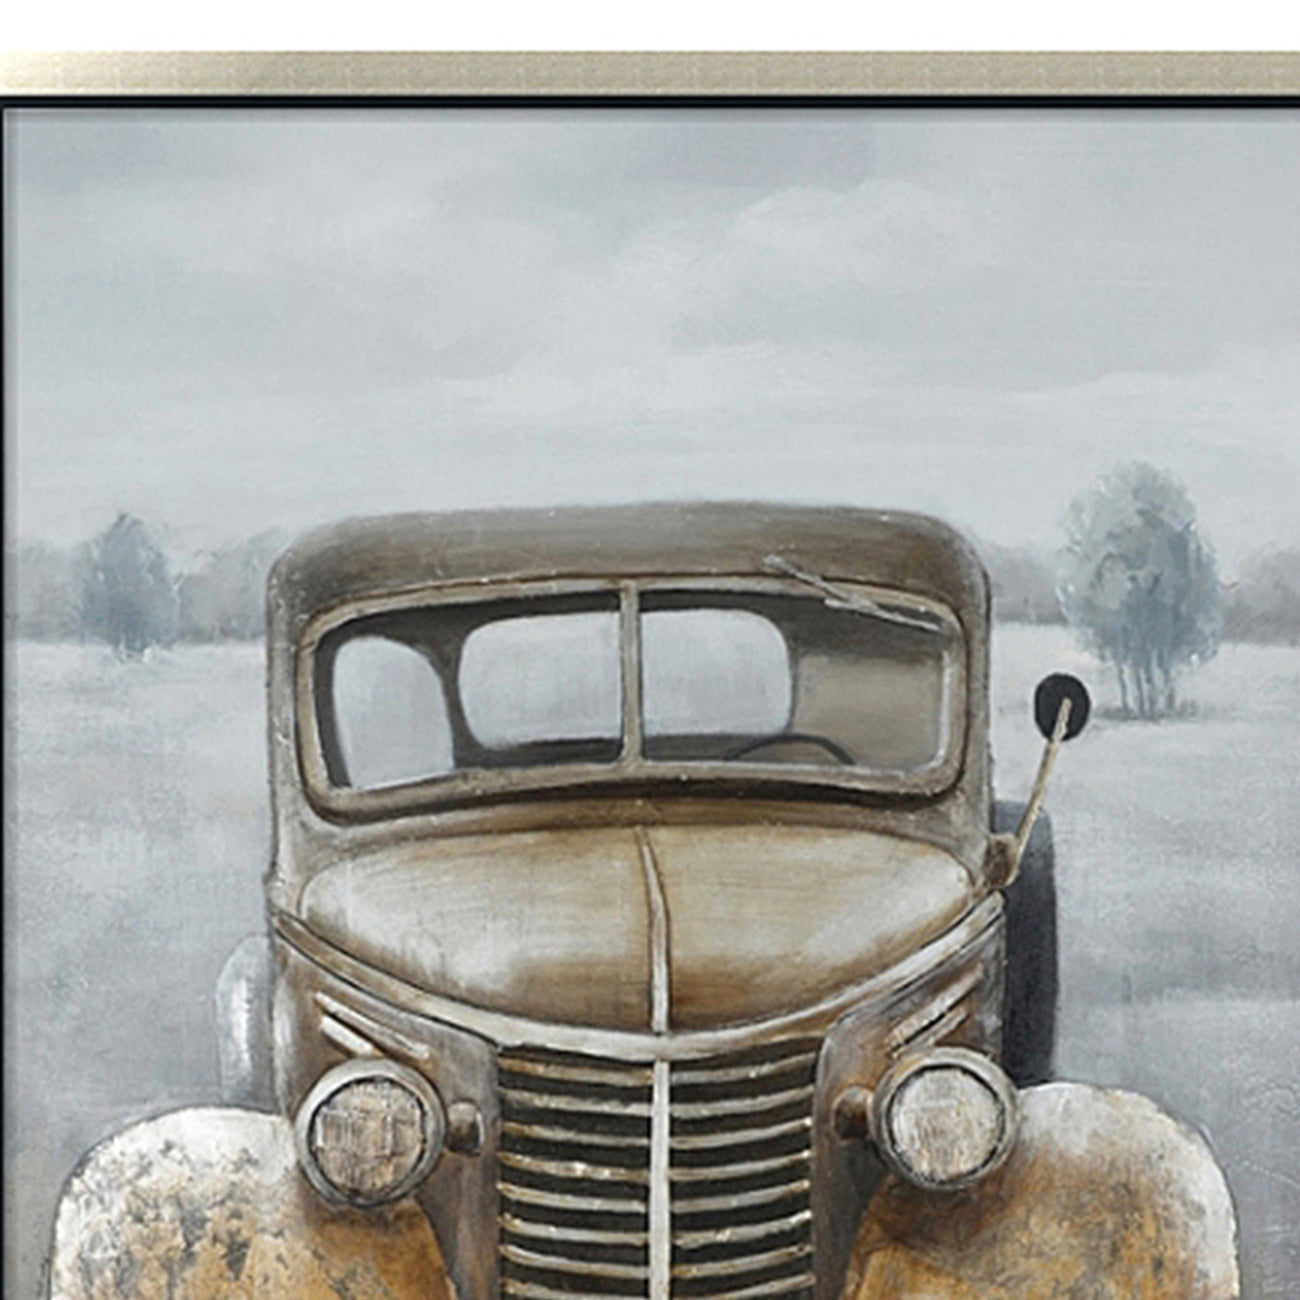 Hand Painted Acrylic and Aluminum 3D Wall Art Vintage Truck 39 x 59 Rectangular Canvas with a Grey Wooden Frame